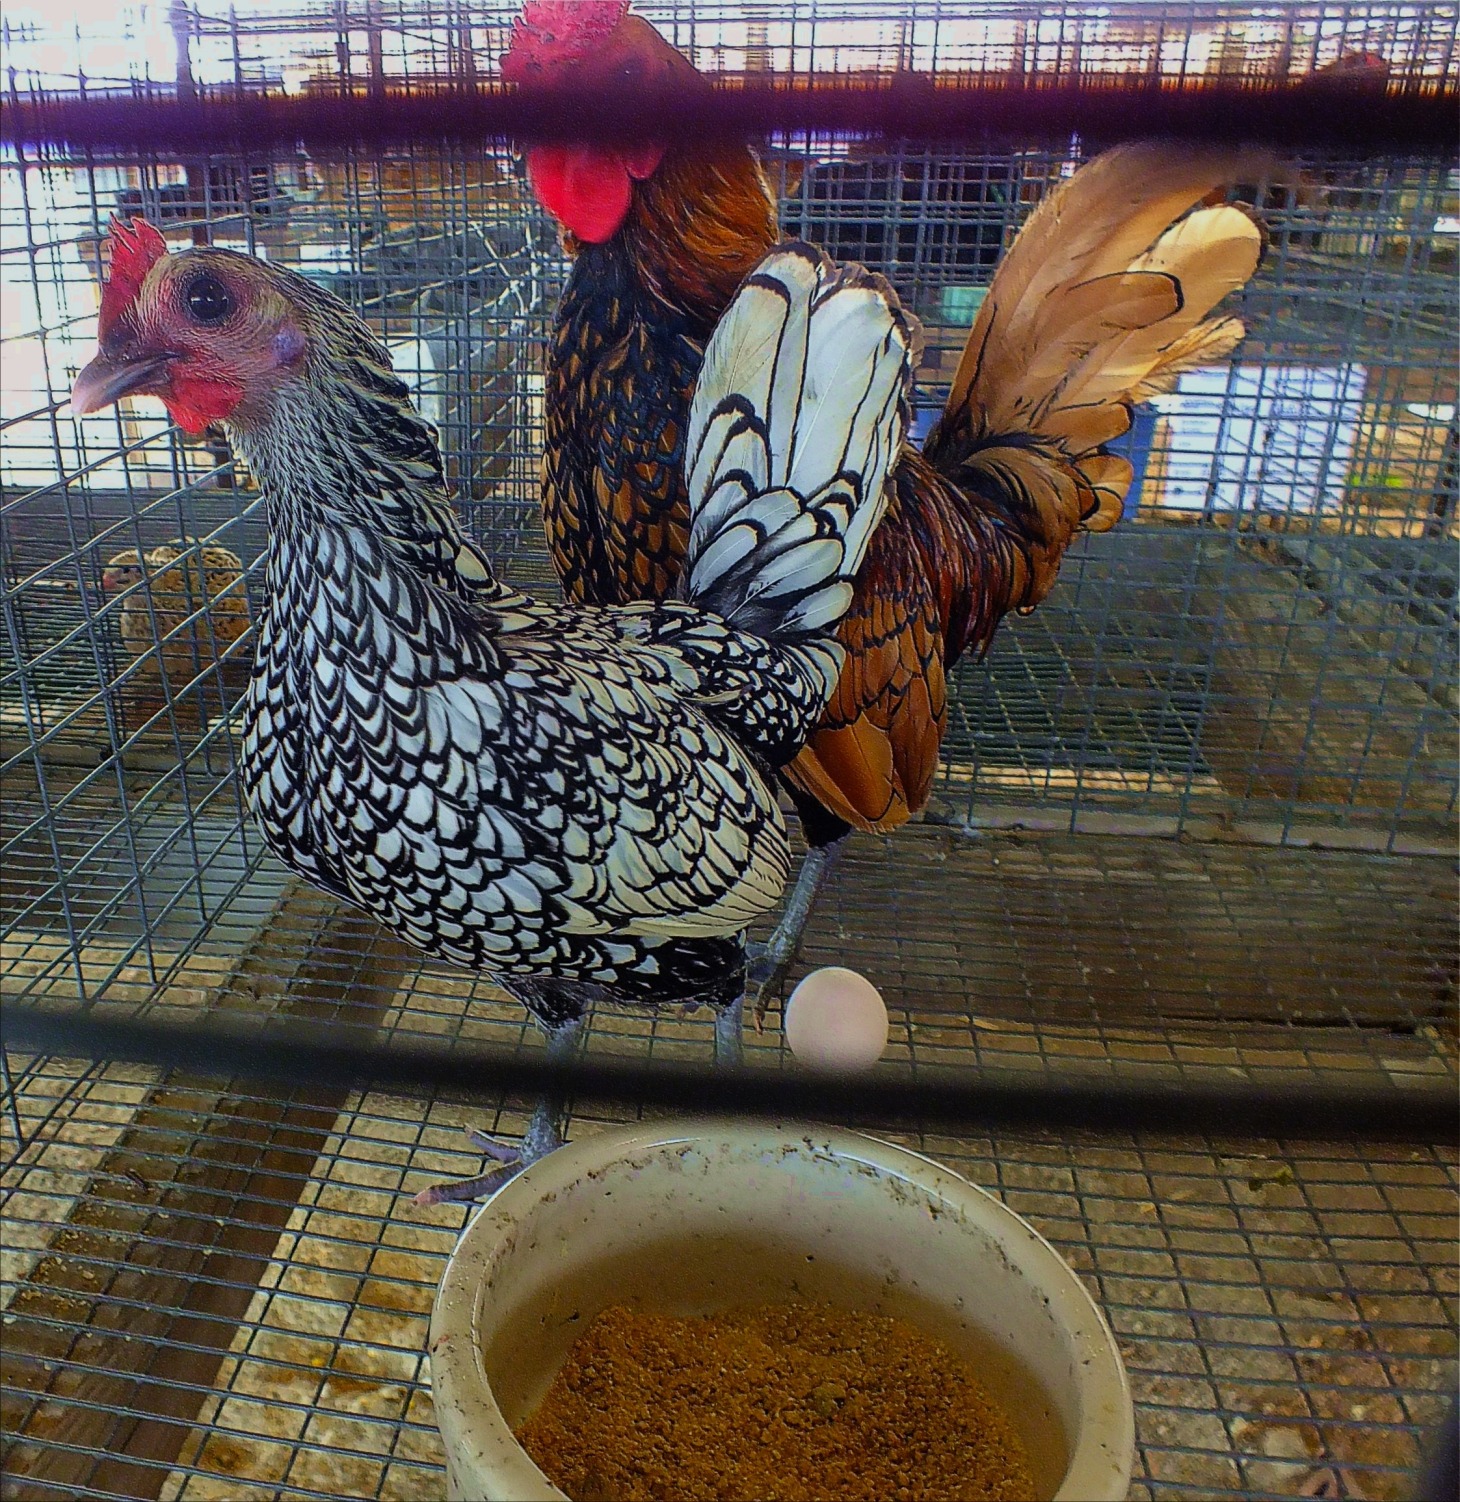 At the County Fair... Rooster, Hen & Youngster.  Photo by Thomas Peace c. 2015